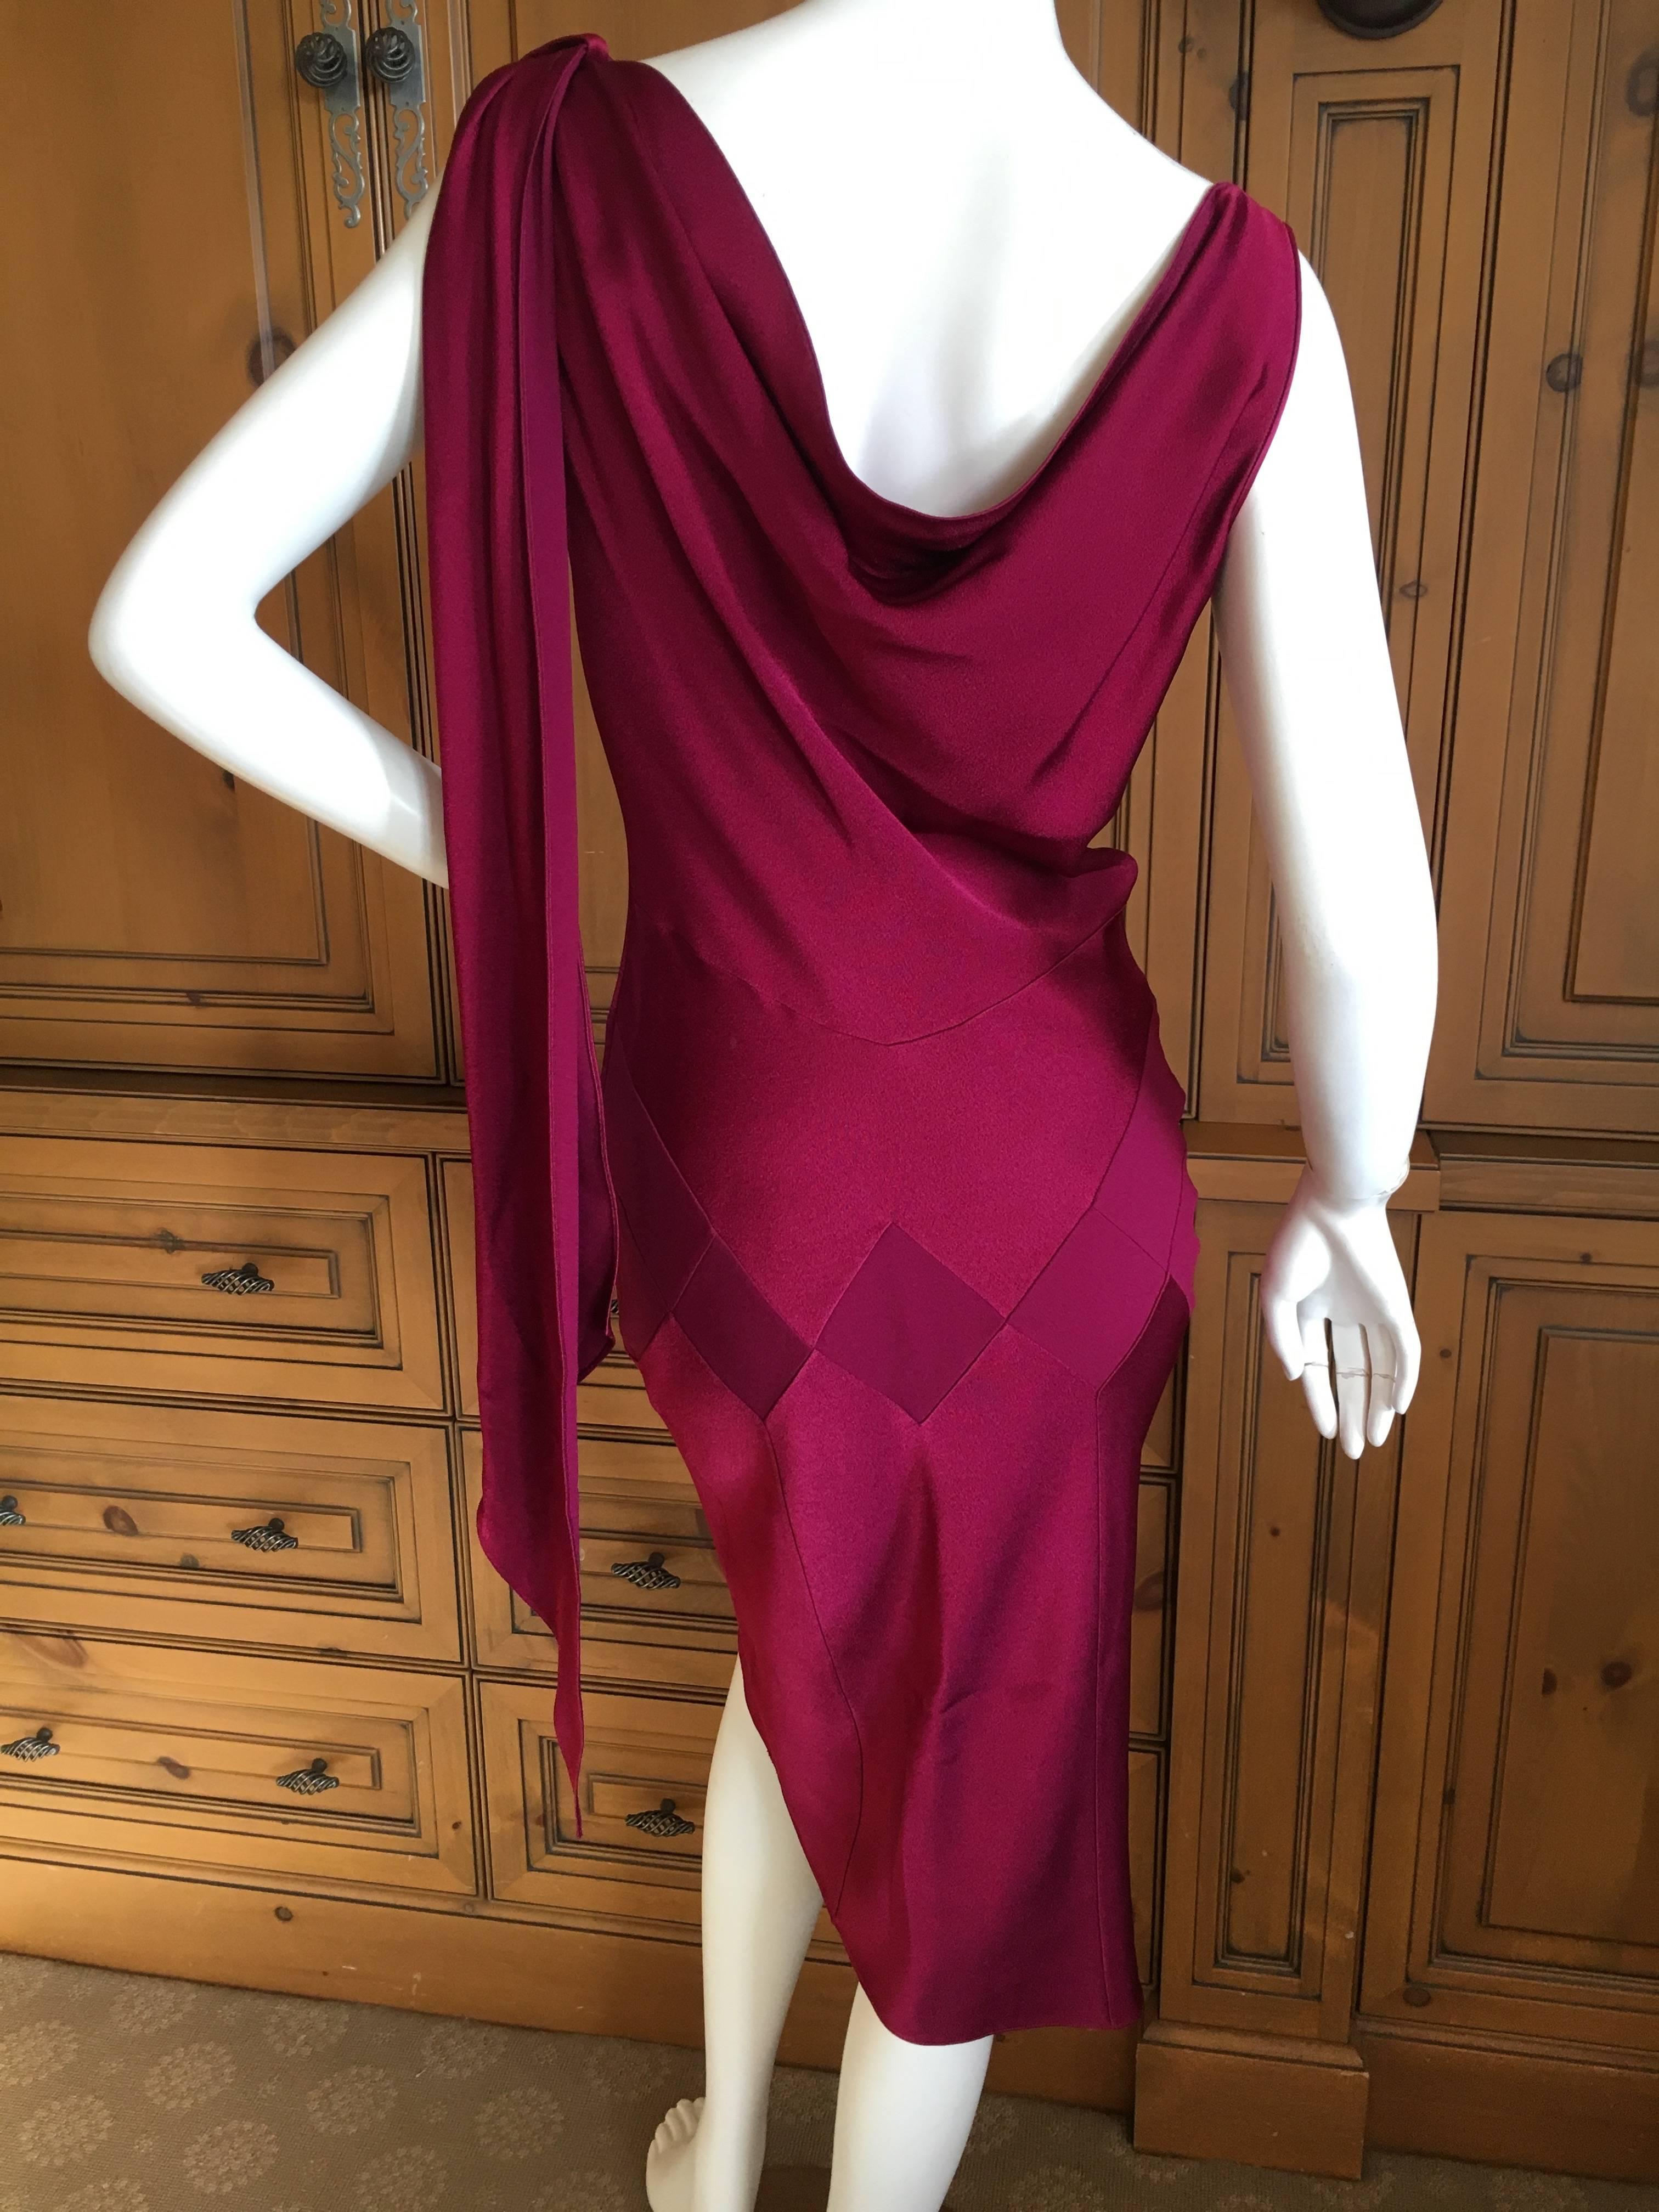 John Galliano Vintage Red Bias Cut Dress with Attached Scarf Late 90's  In Excellent Condition For Sale In Cloverdale, CA